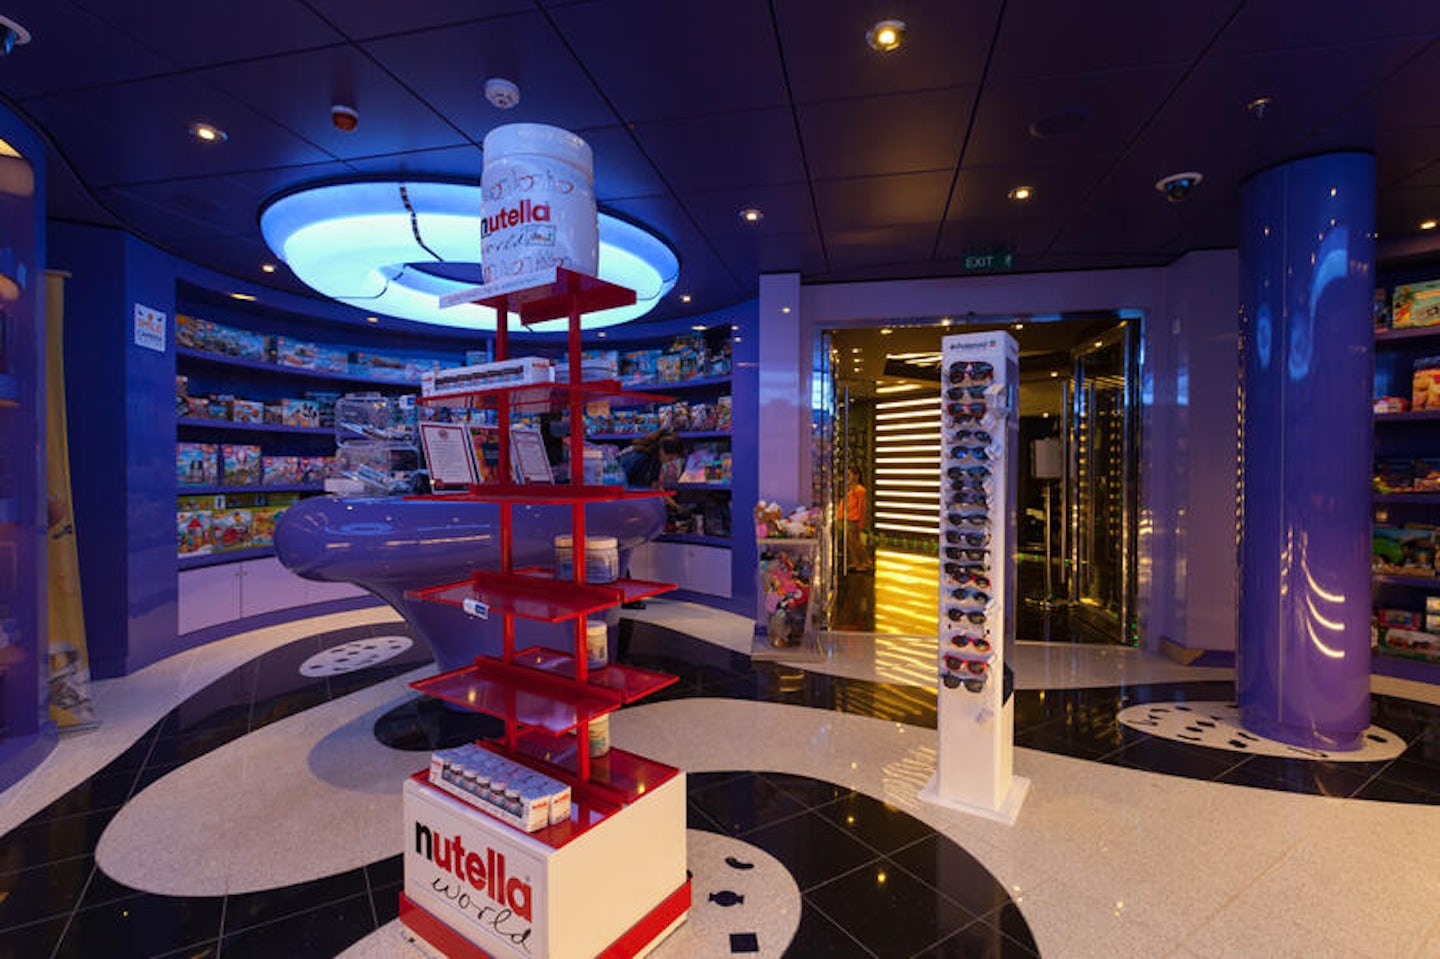 Candy Store on MSC Divina